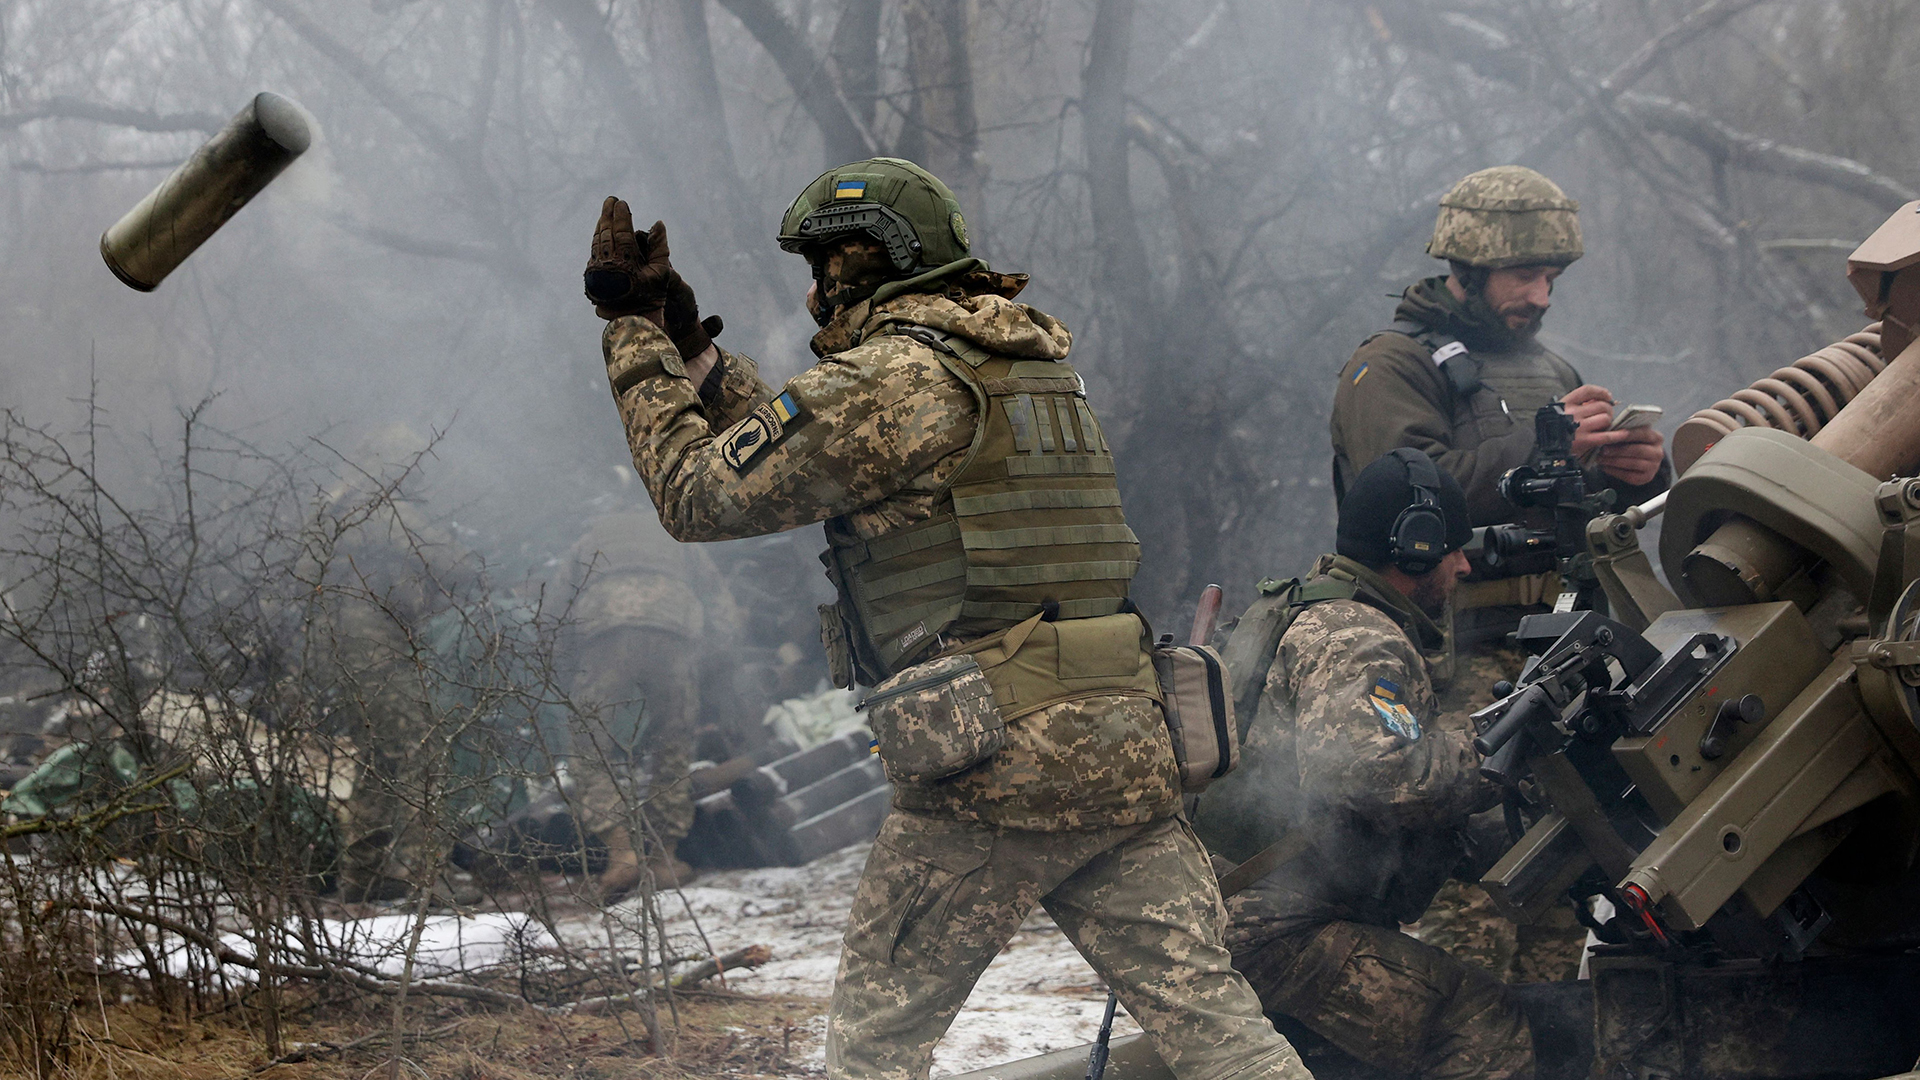 Ukraine Situation Report: Heavy Fighting As Battle For Vuhledar Rages - The War Zone